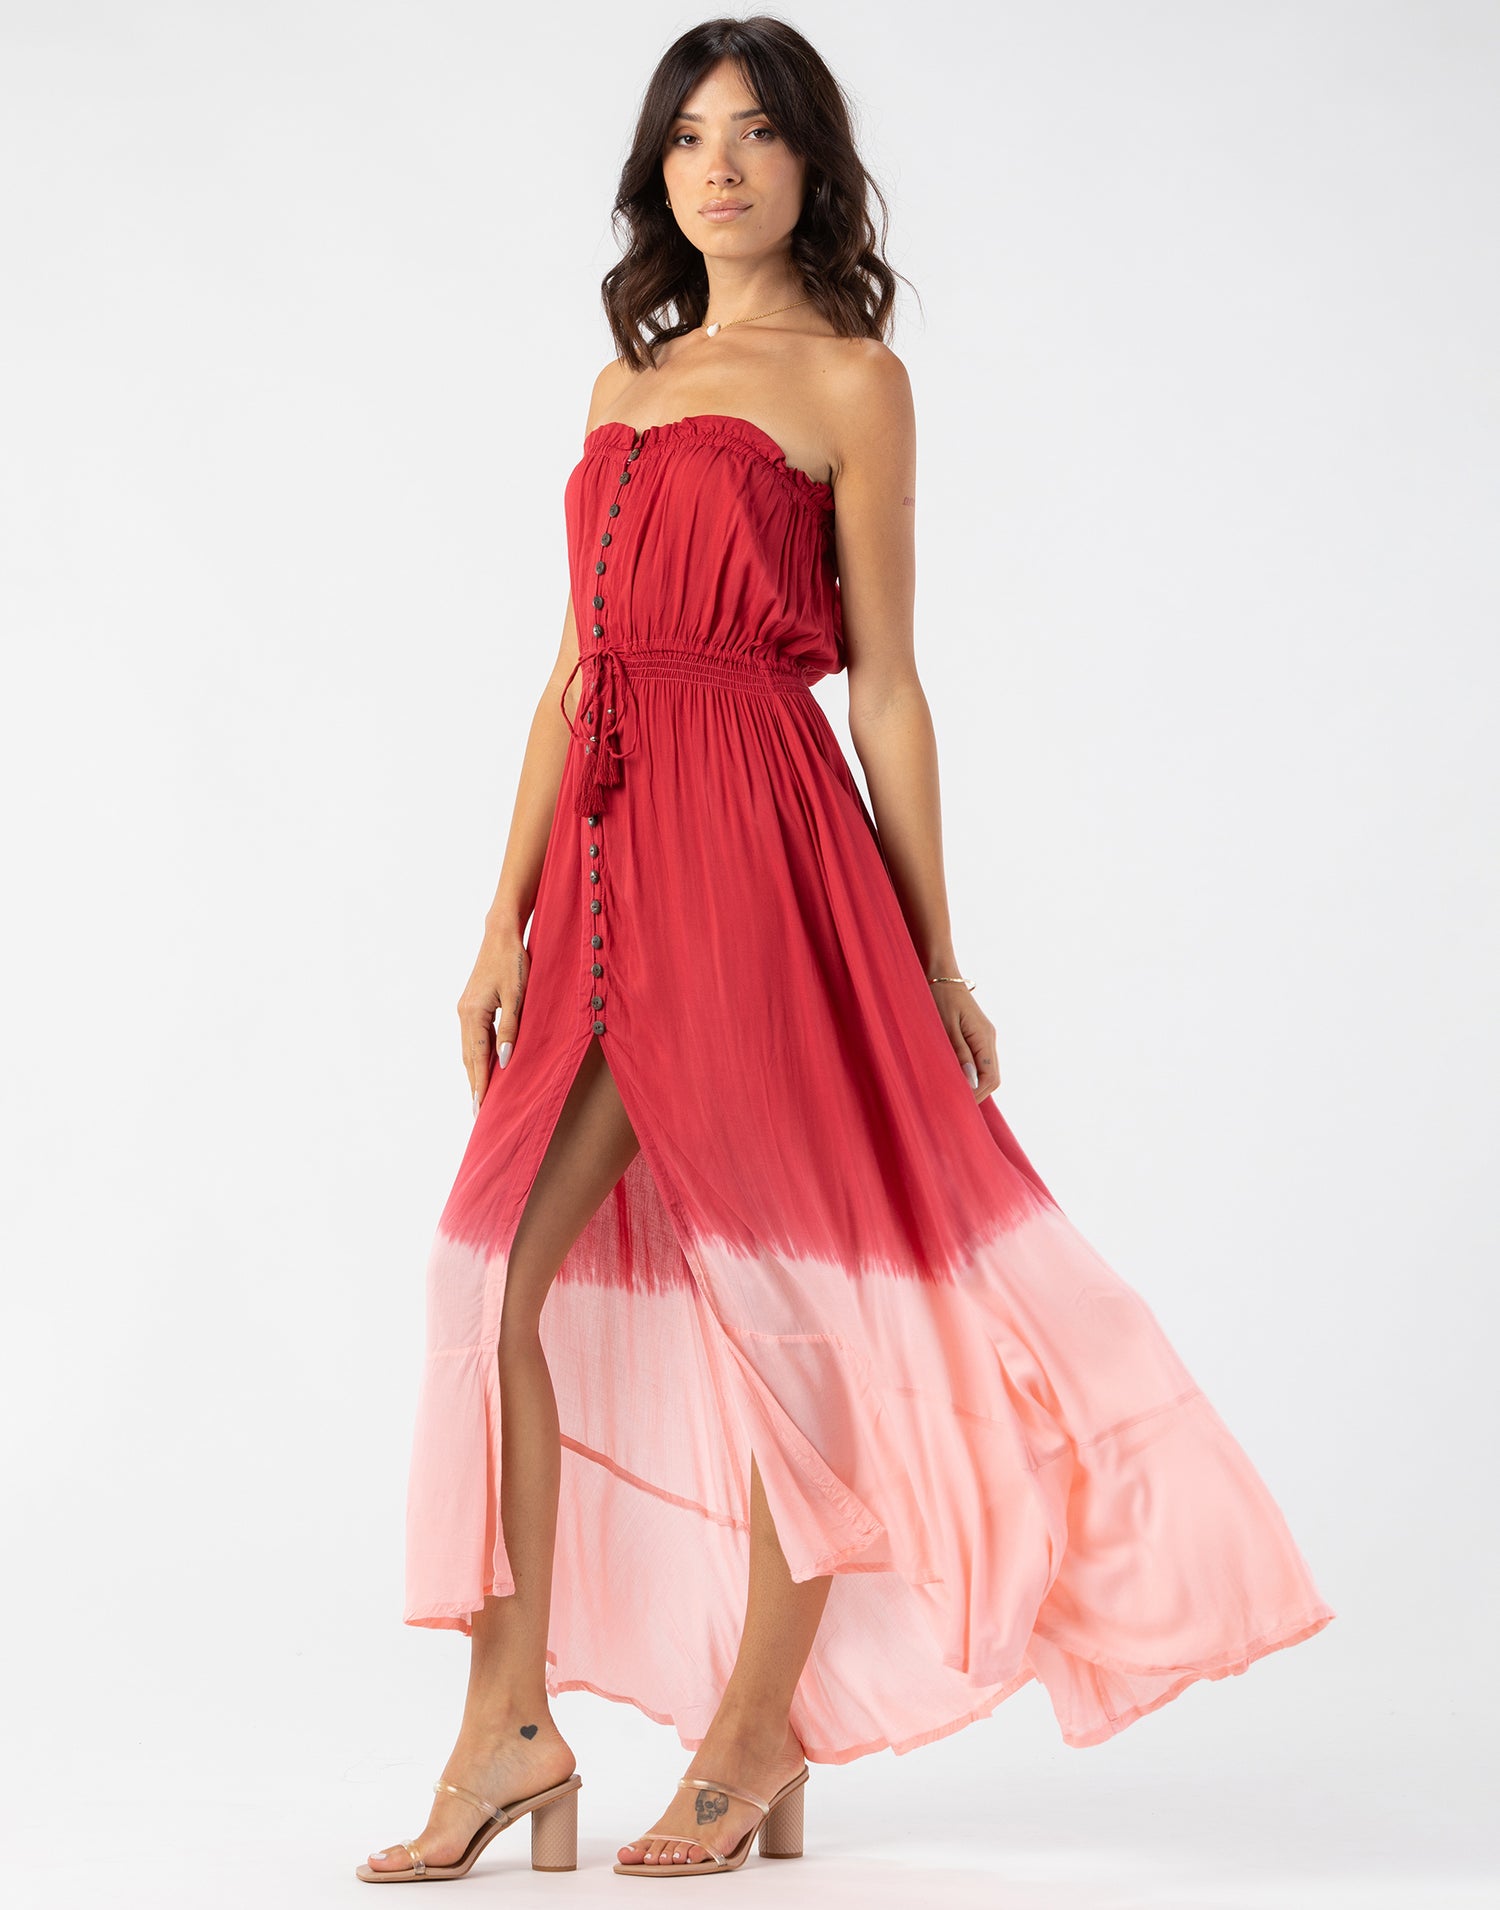 Ryden Maxi Dress by Tiare Hawaii in Ruby Peach Ombre - Angled View